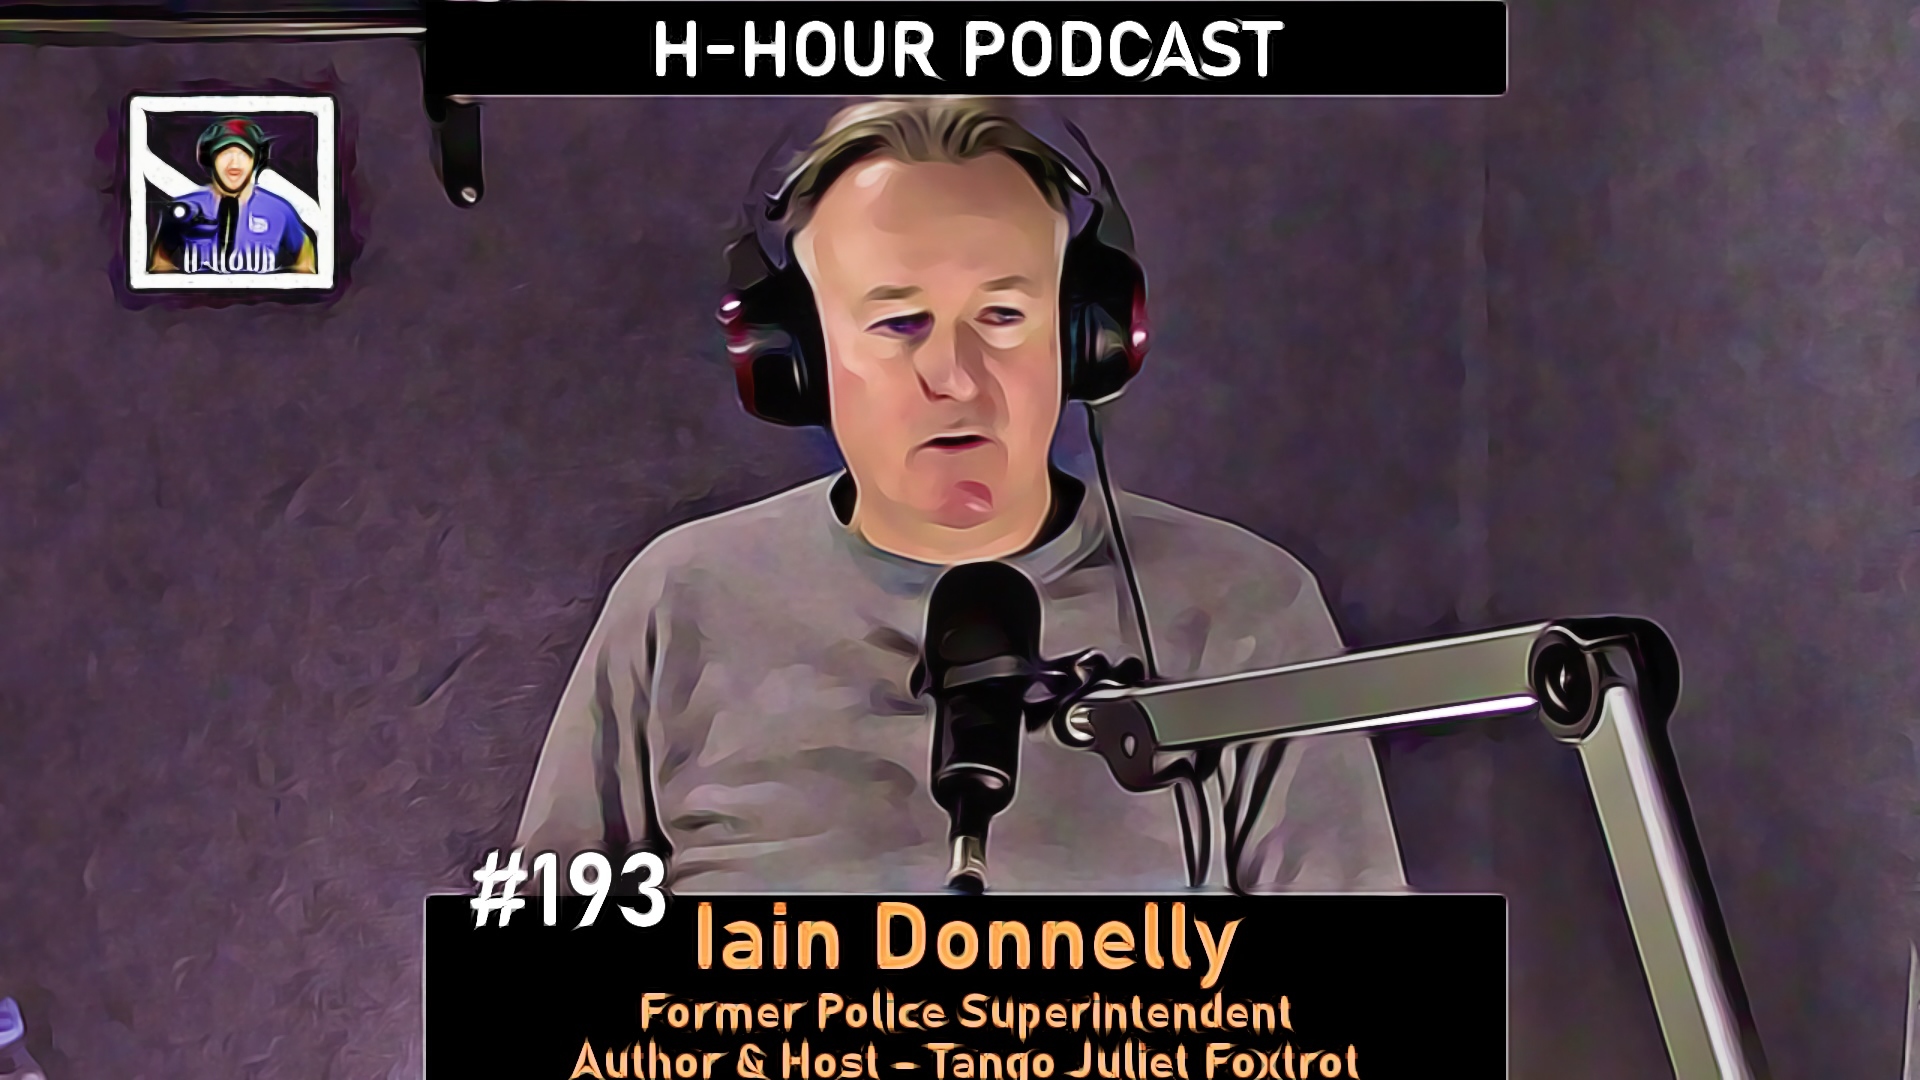 h-hour Podcast NFT #193 iain donnelly cover image